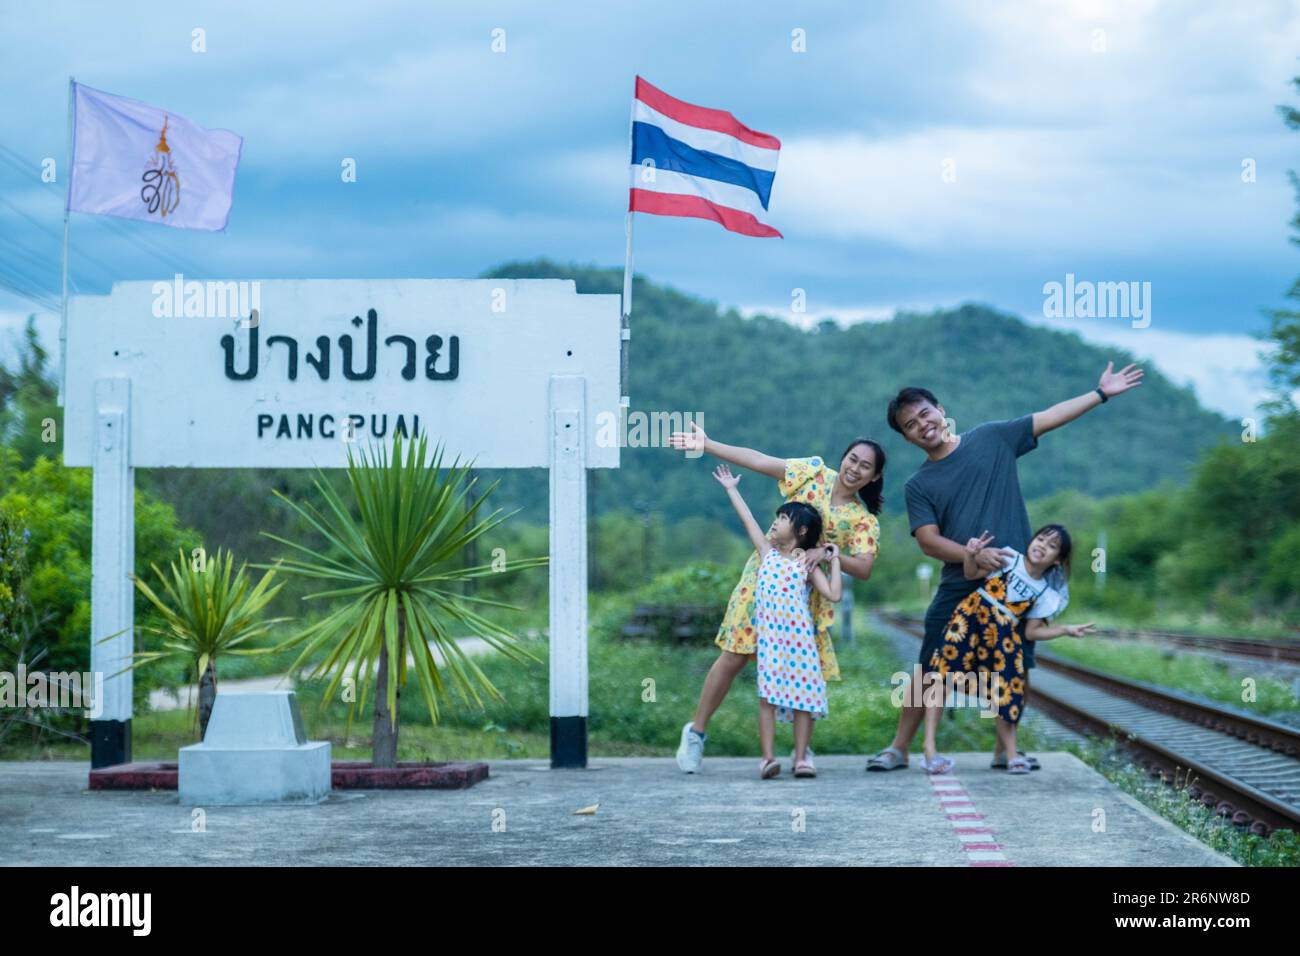 8 June 2023: Lampang, Thailand - Happy family taking pictures together at Pang Puai Railway Station against a background of green mountains and trees. Stock Photo